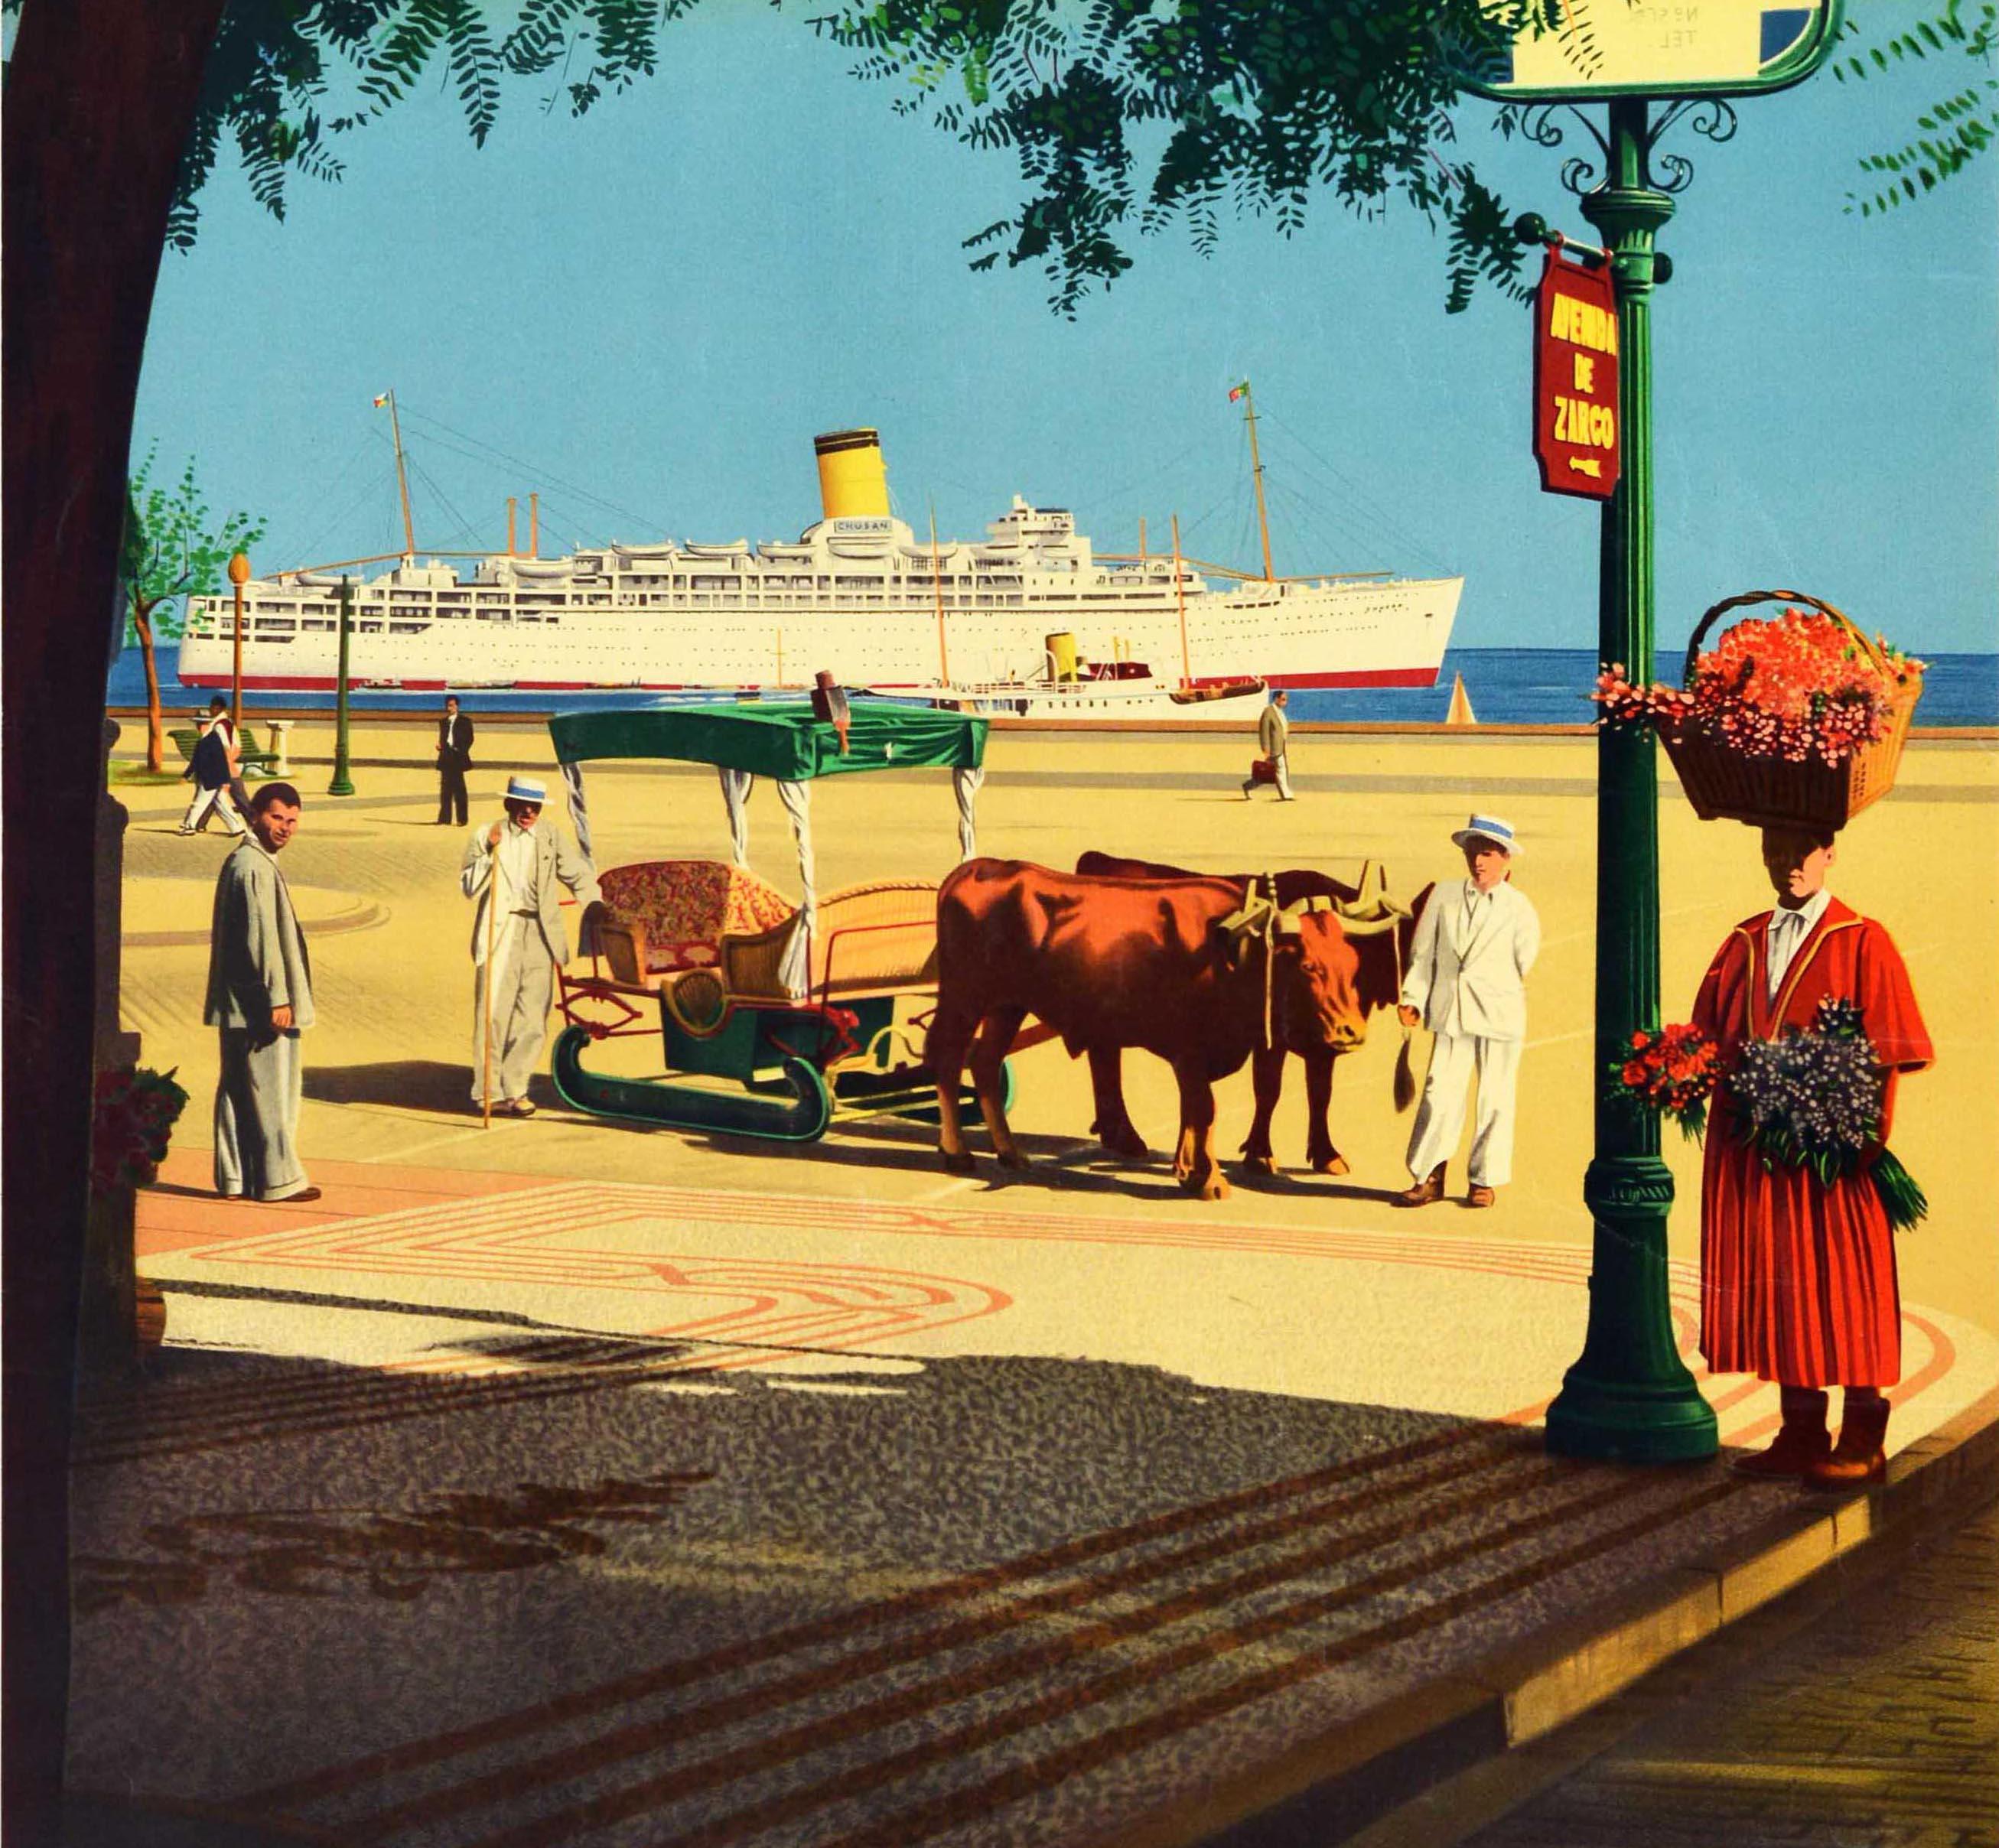 Original vintage travel poster for P&O Cruises featuring a colourful view towards an ocean liner with a smaller ship and sailing boat visible at the end of a promenade with people looking towards the viewer including two people in white suits